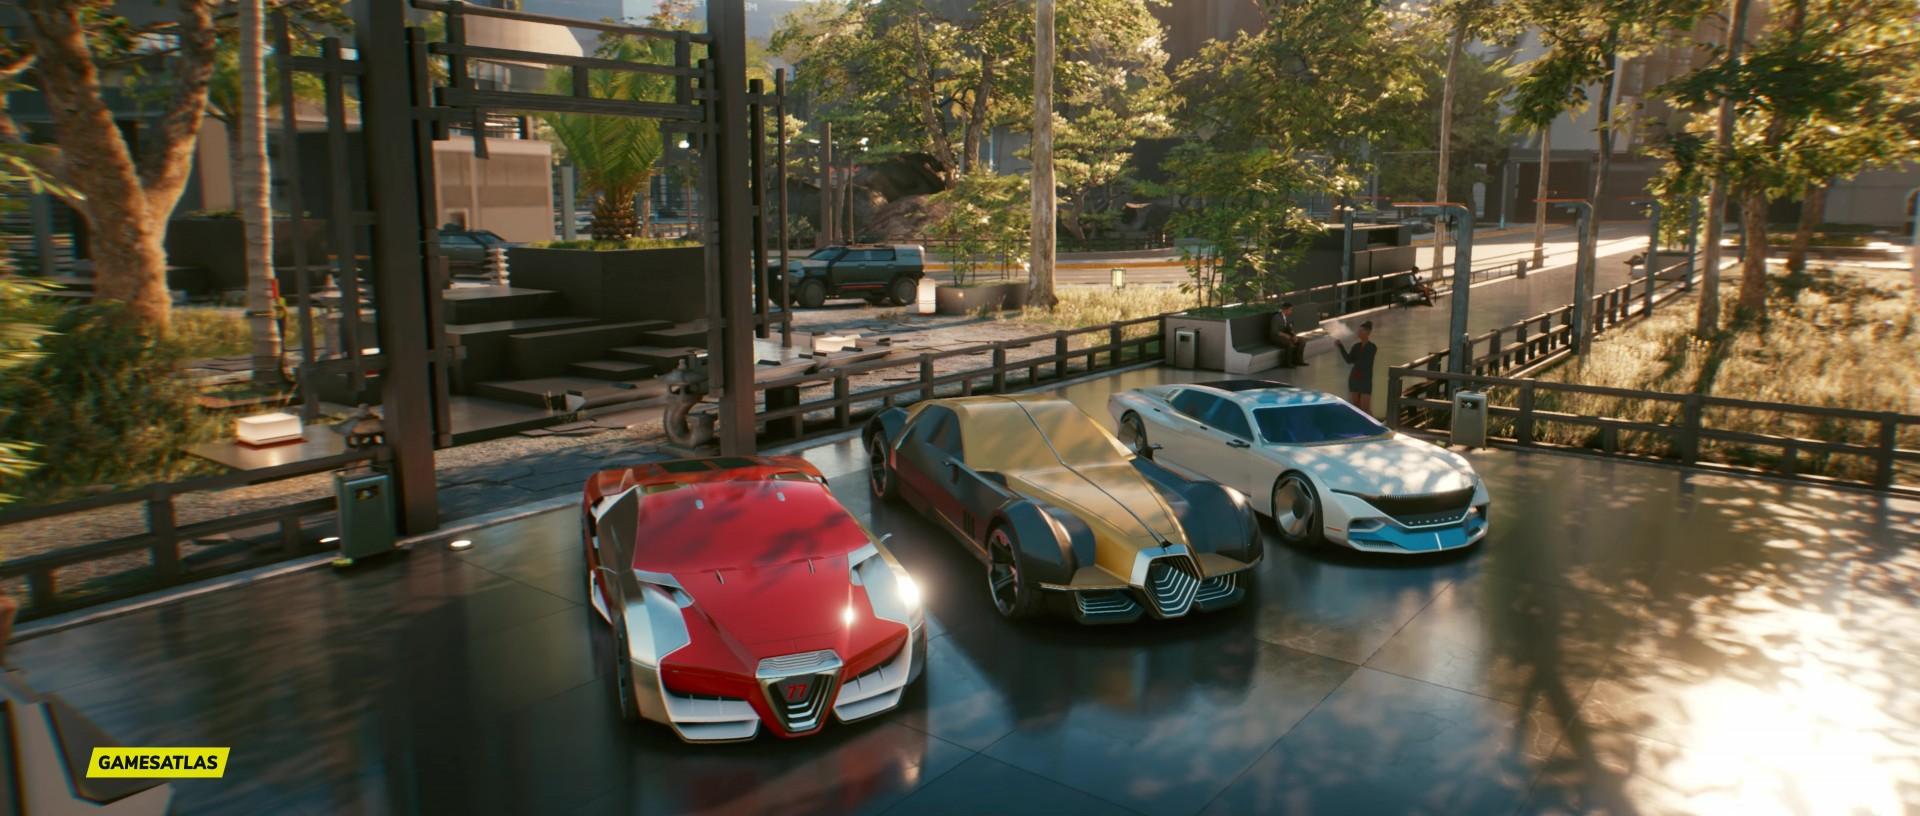 Cyberpunk 2077: Best &amp; Fastest Cars Ranked by Top Speed - Cyberpunk 2077 Vehicles Guide